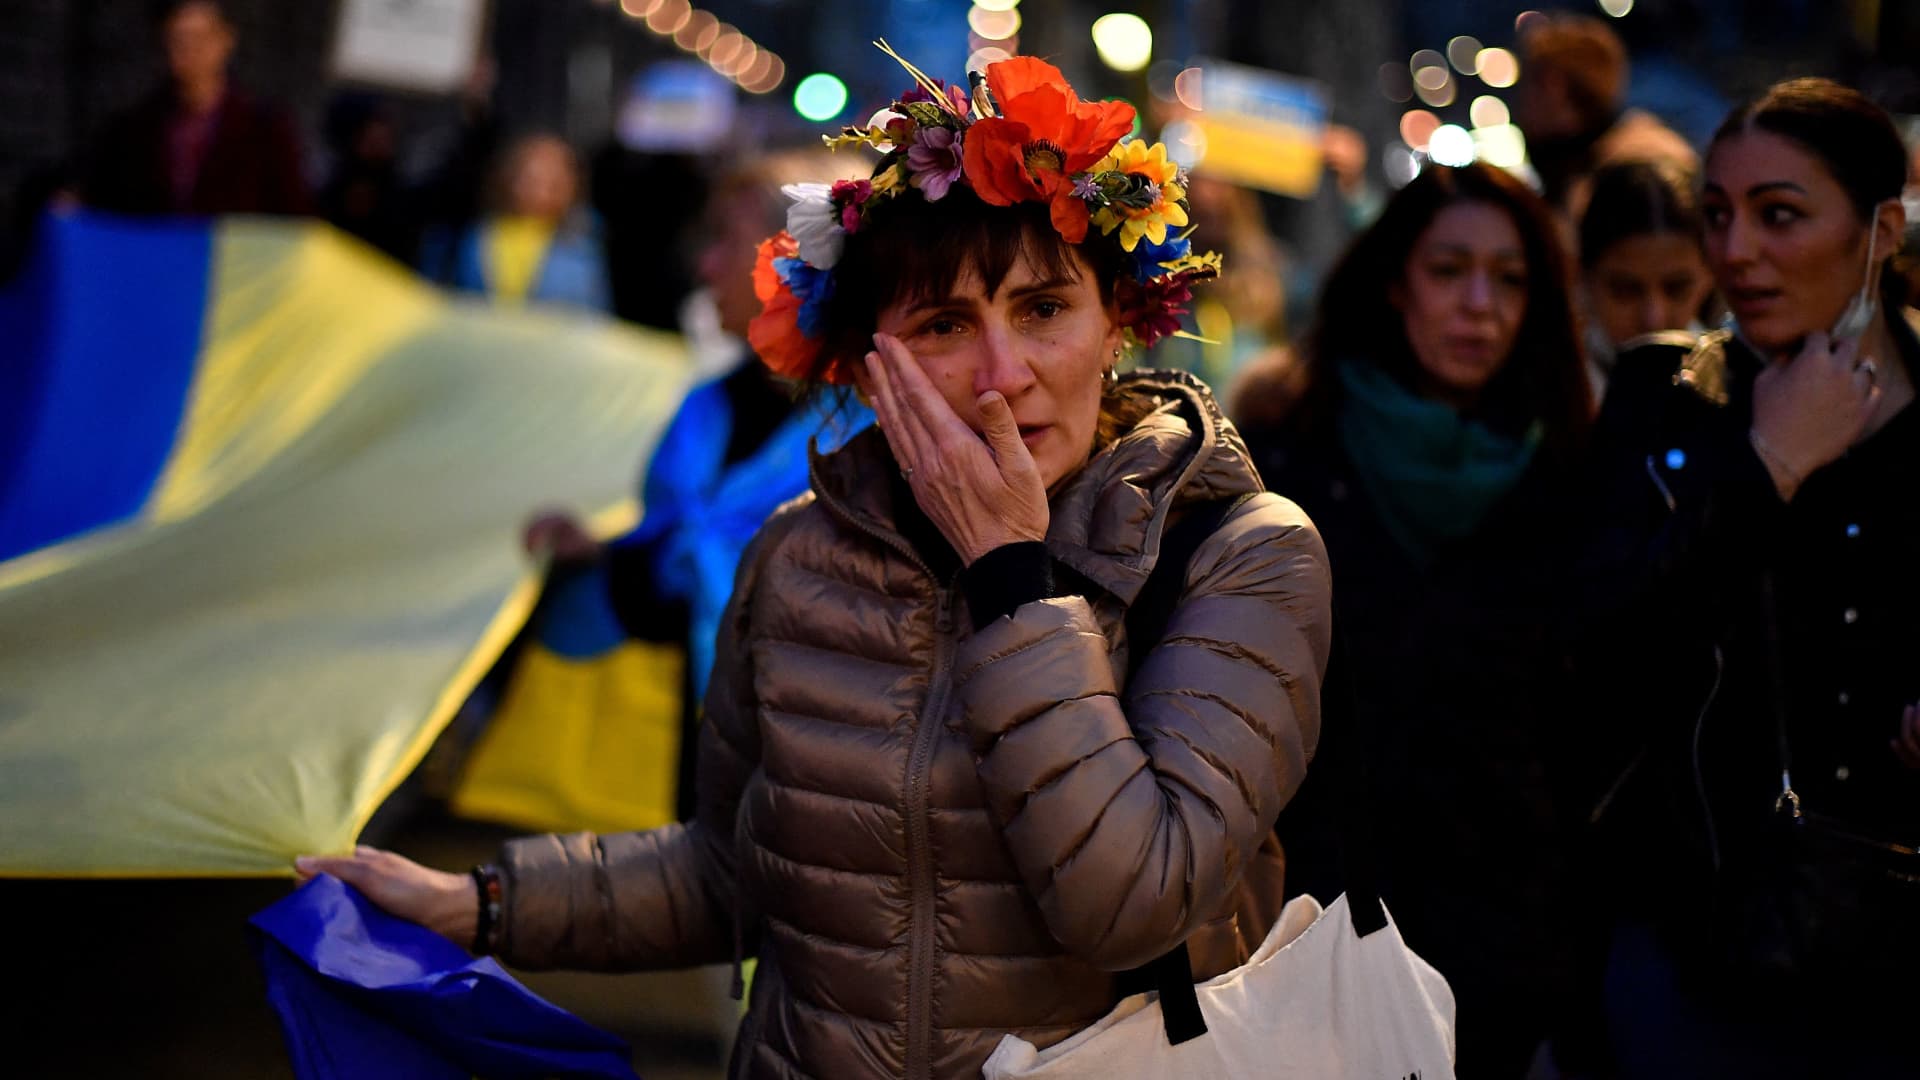 A demonstrator cries during a protest against Russia's military operation in Ukraine, in Barcelona on February 24, 2022.